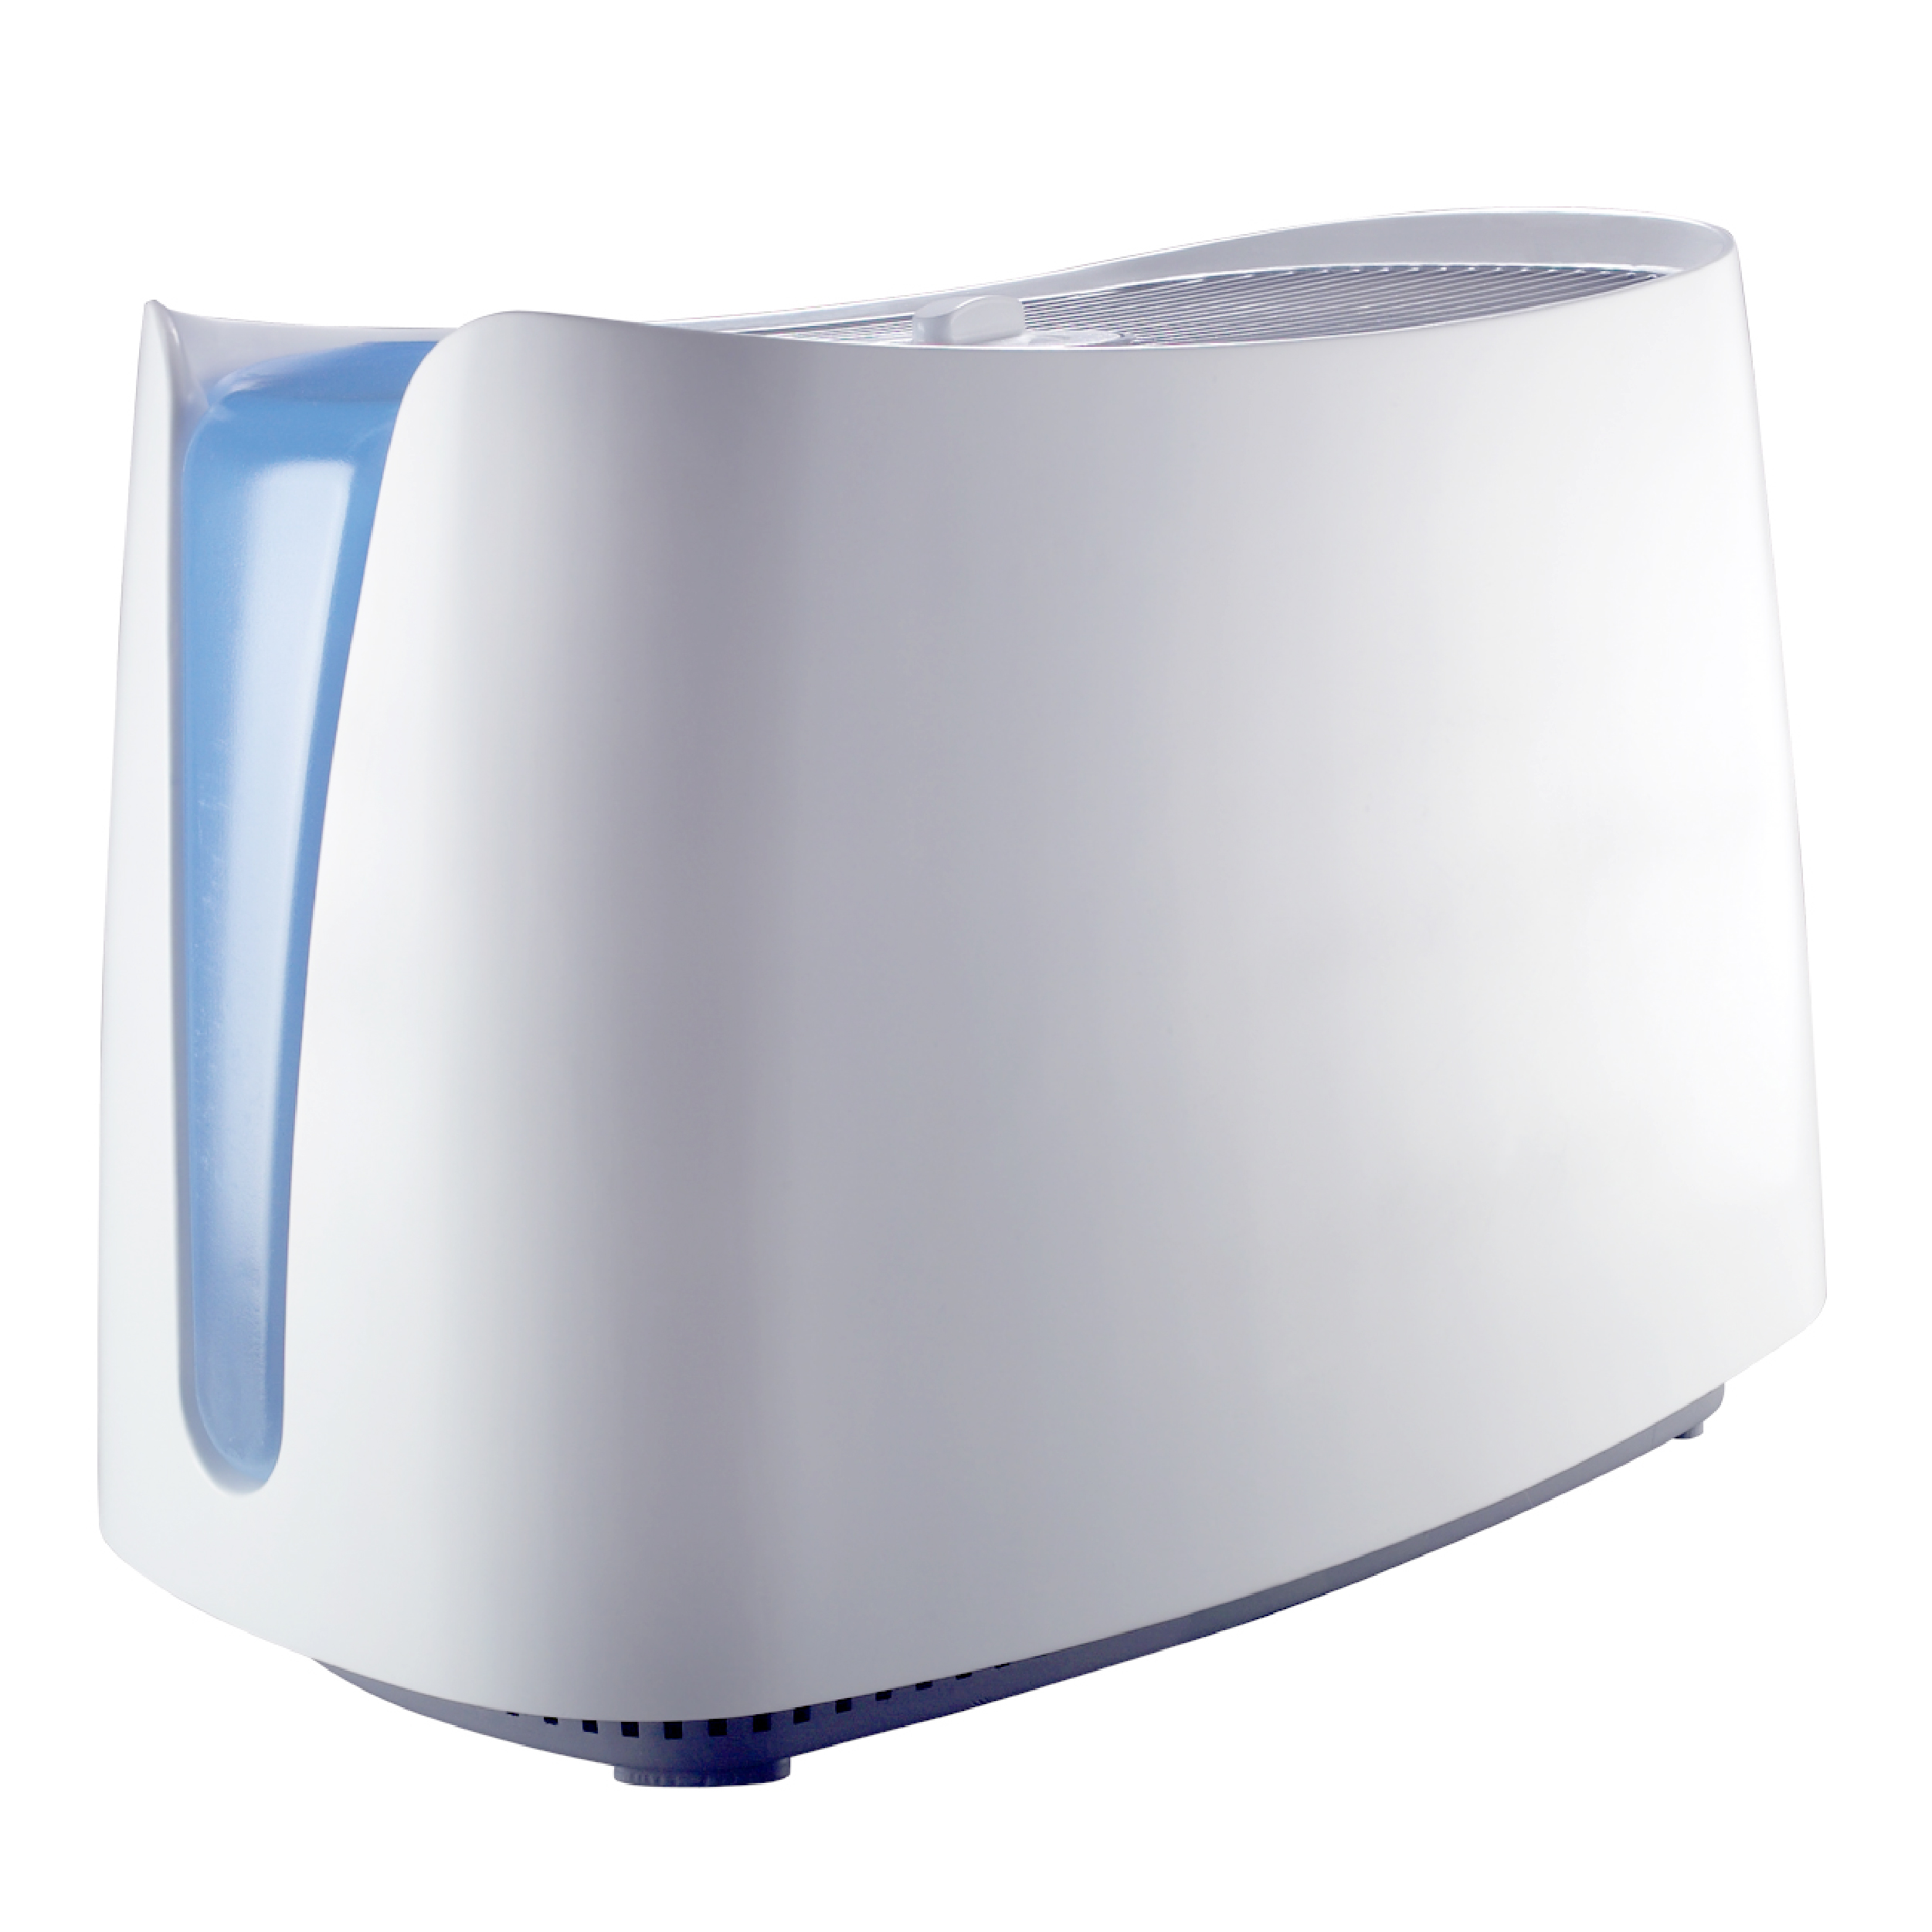 Honeywell Cool Moisture Humidifier for Medium Rooms, 400 sq ft, White, HCM350 - image 1 of 9